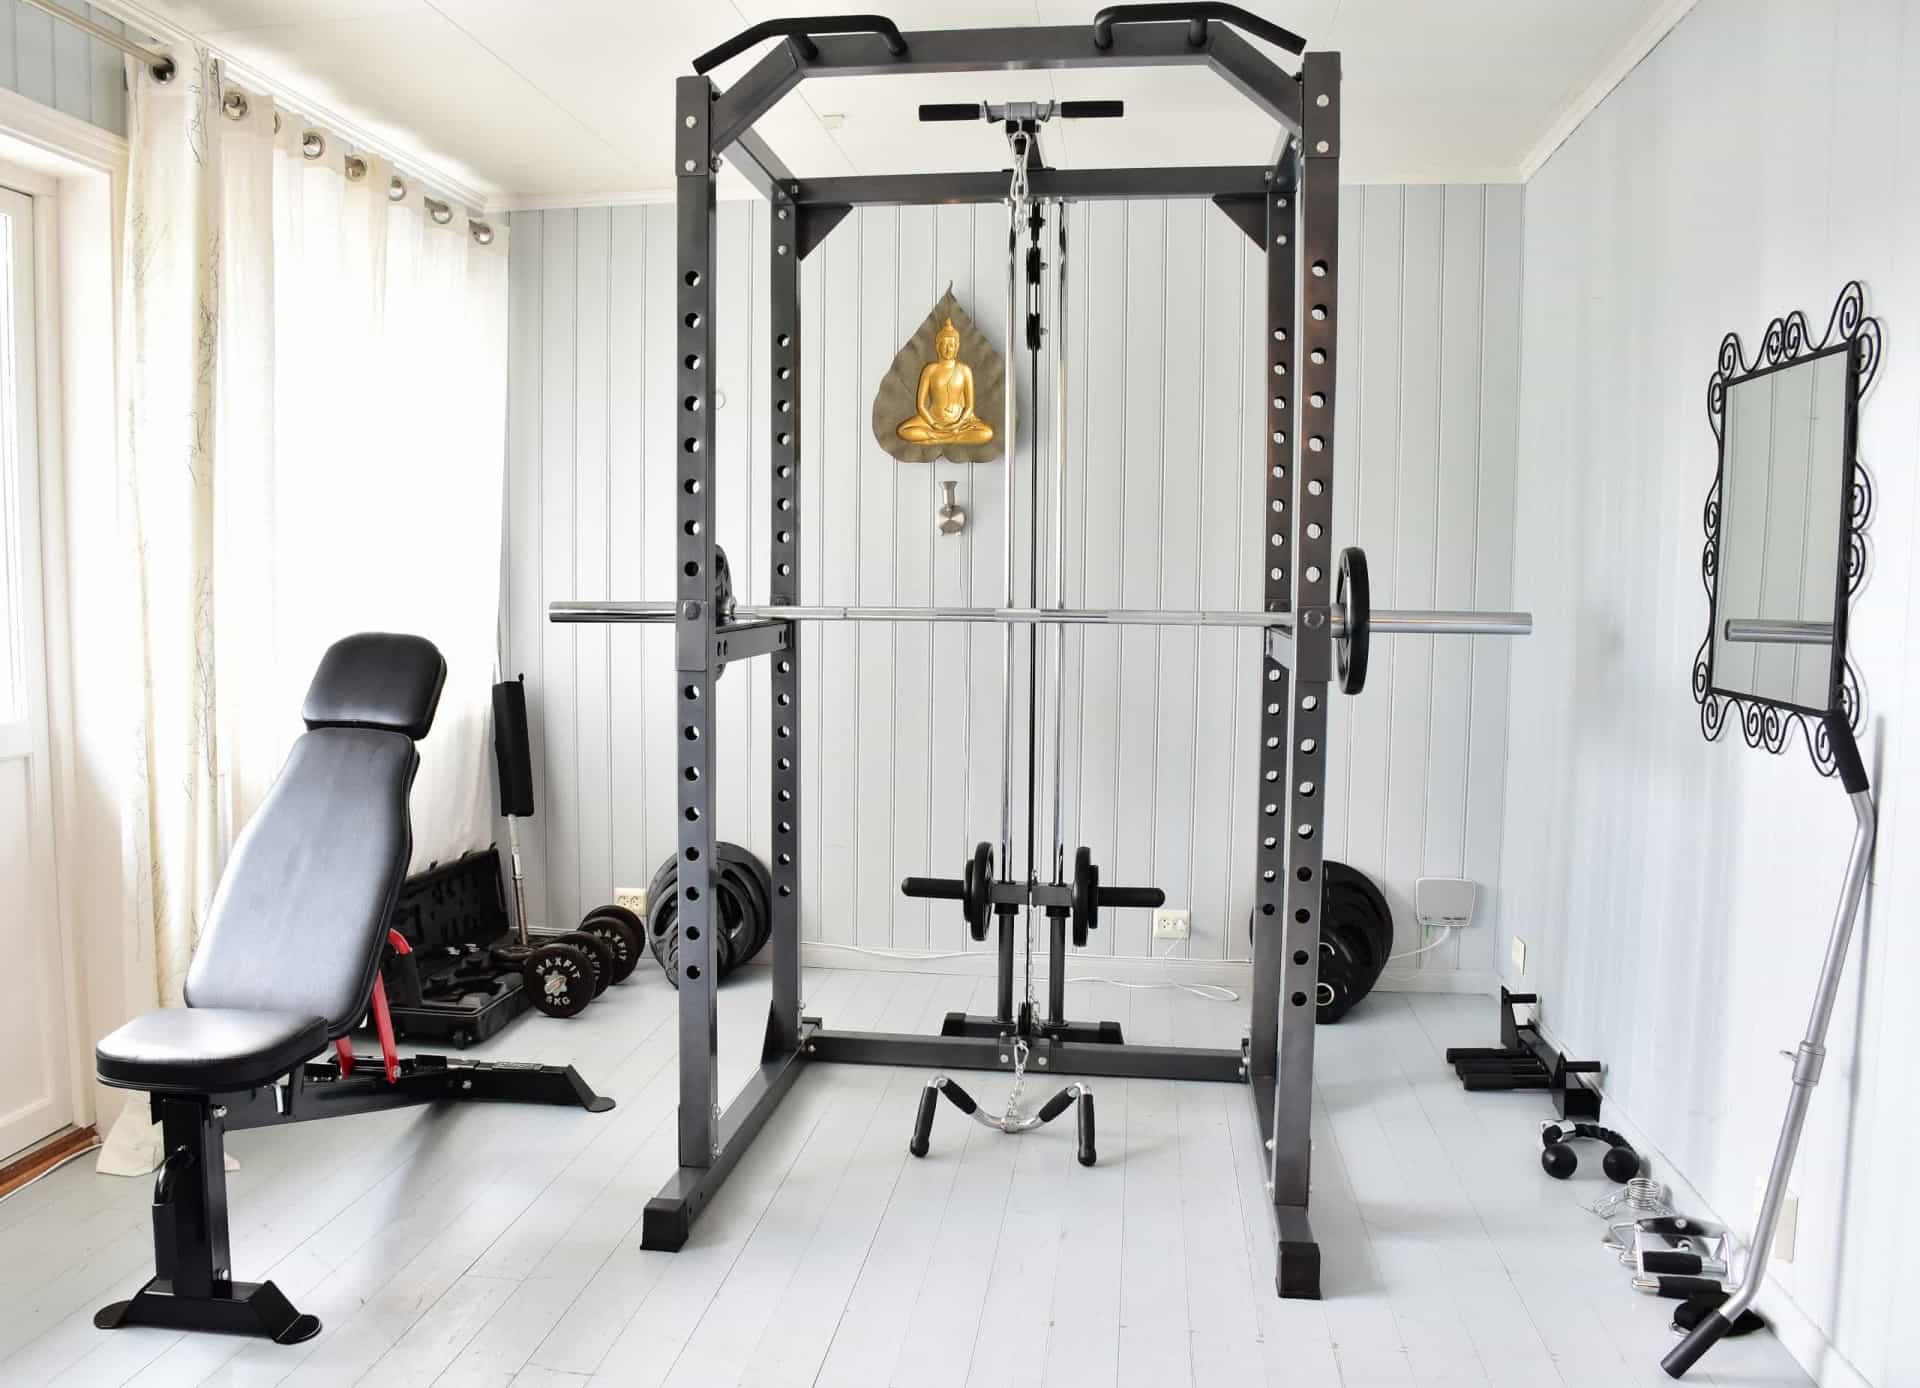 There are numerous benefits to having a home gym. Not sure how to set one up? Just check out our guide on <a href="https://uk.starsinsider.com/health/373448/how-to-set-up-the-perfect-home-gym">how to set up the perfect home gym</a>.